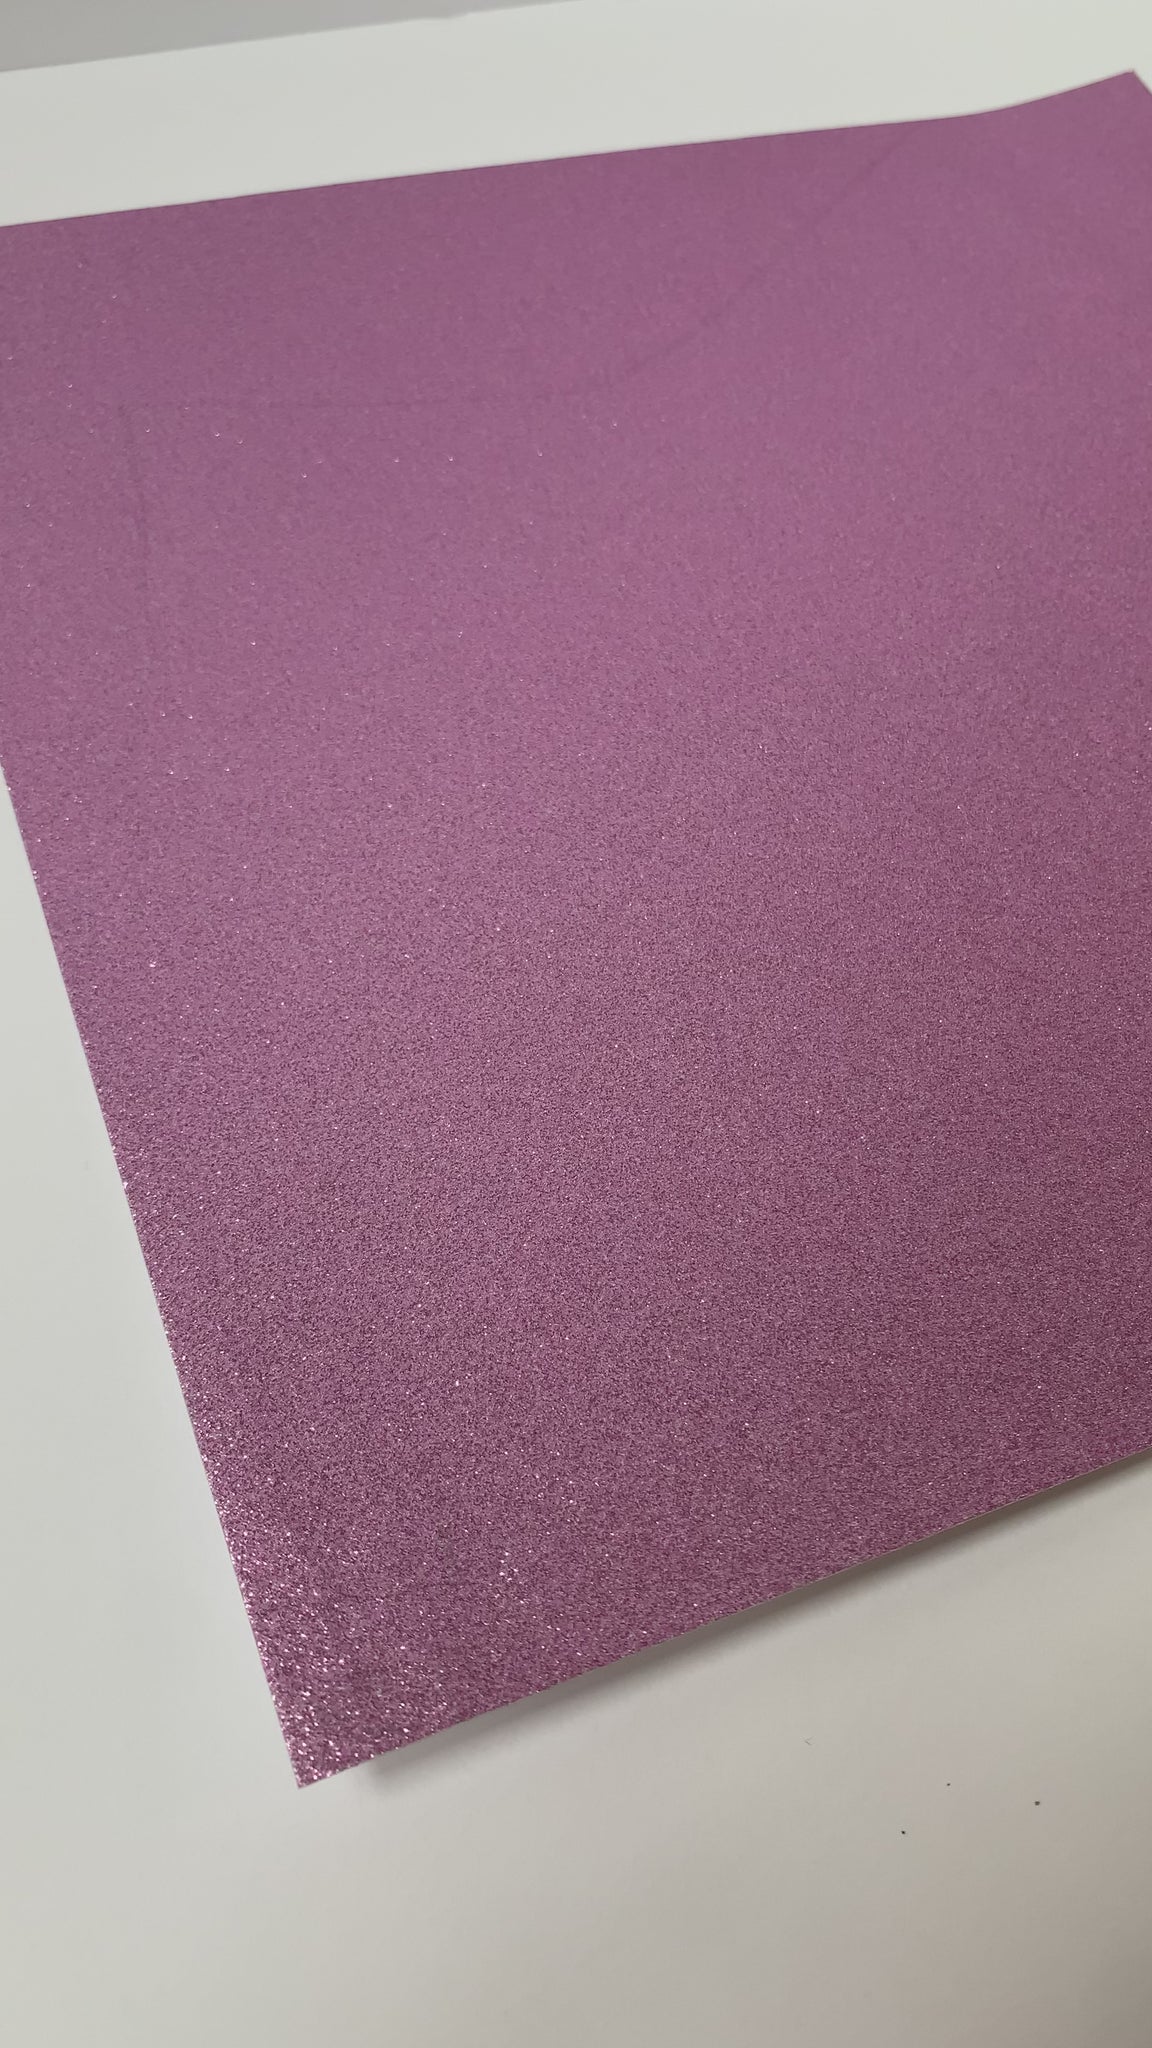 BABY PINK Glitter Luxe Cardstock - Encore Paper – The 12x12